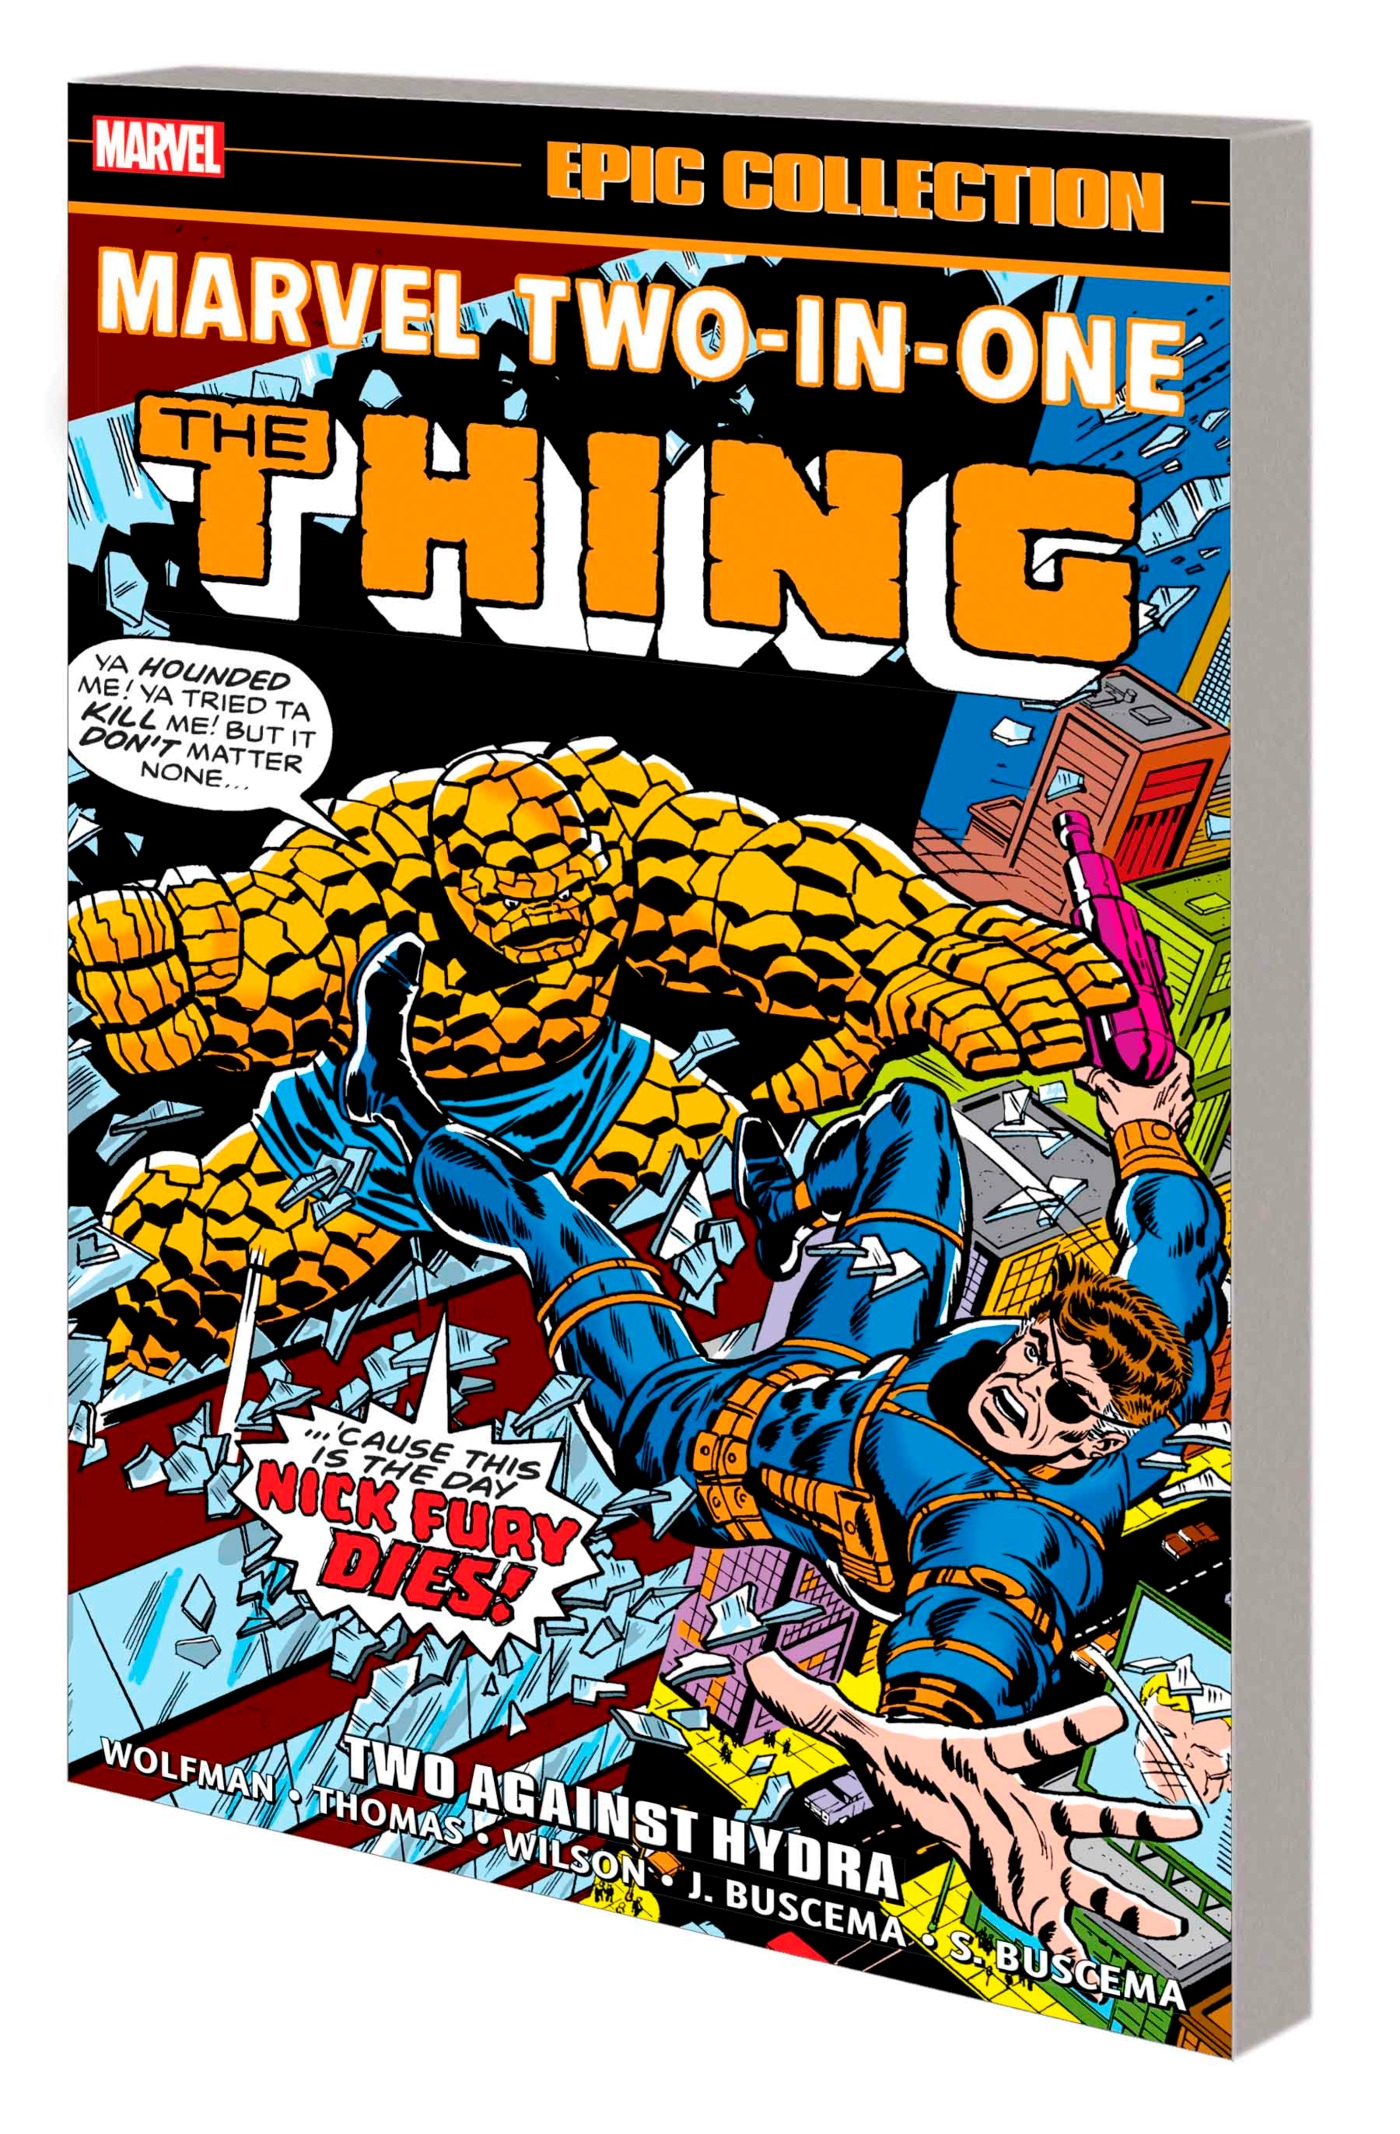 MARVEL TWO-IN-ONE EPIC COLLECTION: TWO AGAINST HYDRA by Marvel